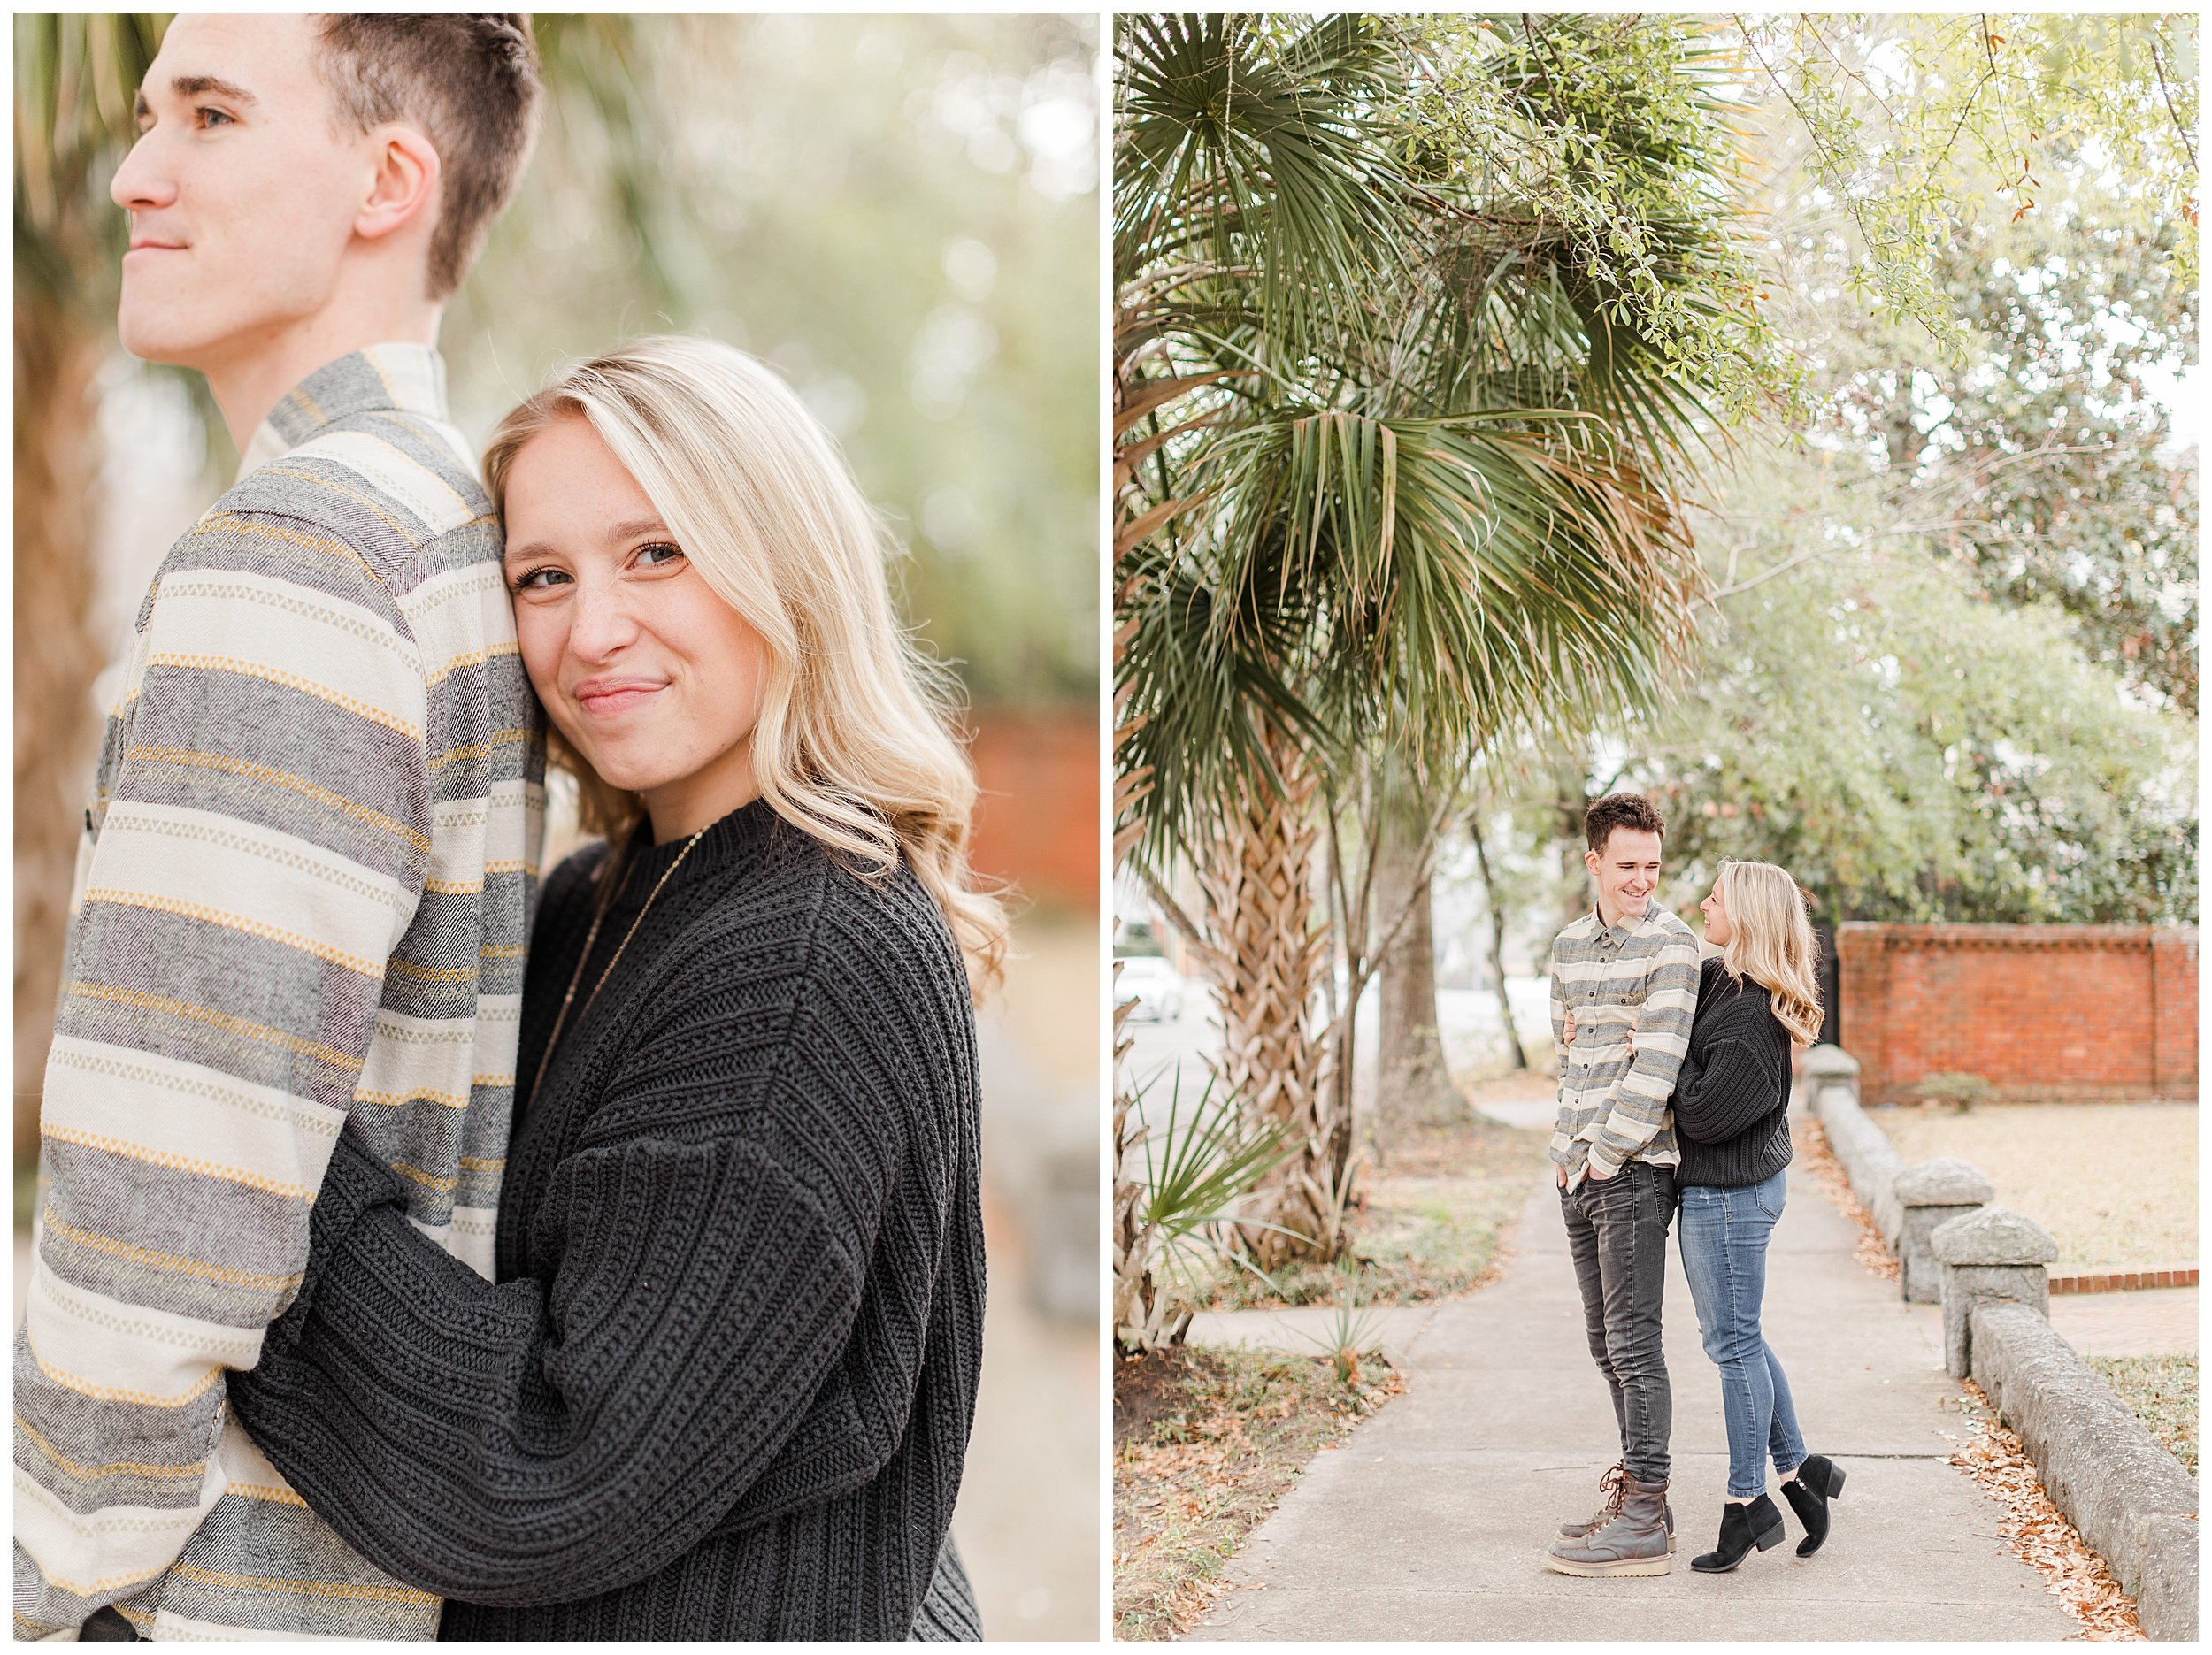 wilmington riverwalk and historic district engagement session ashley christ photography wilmington wedding photographer_0056.jpg